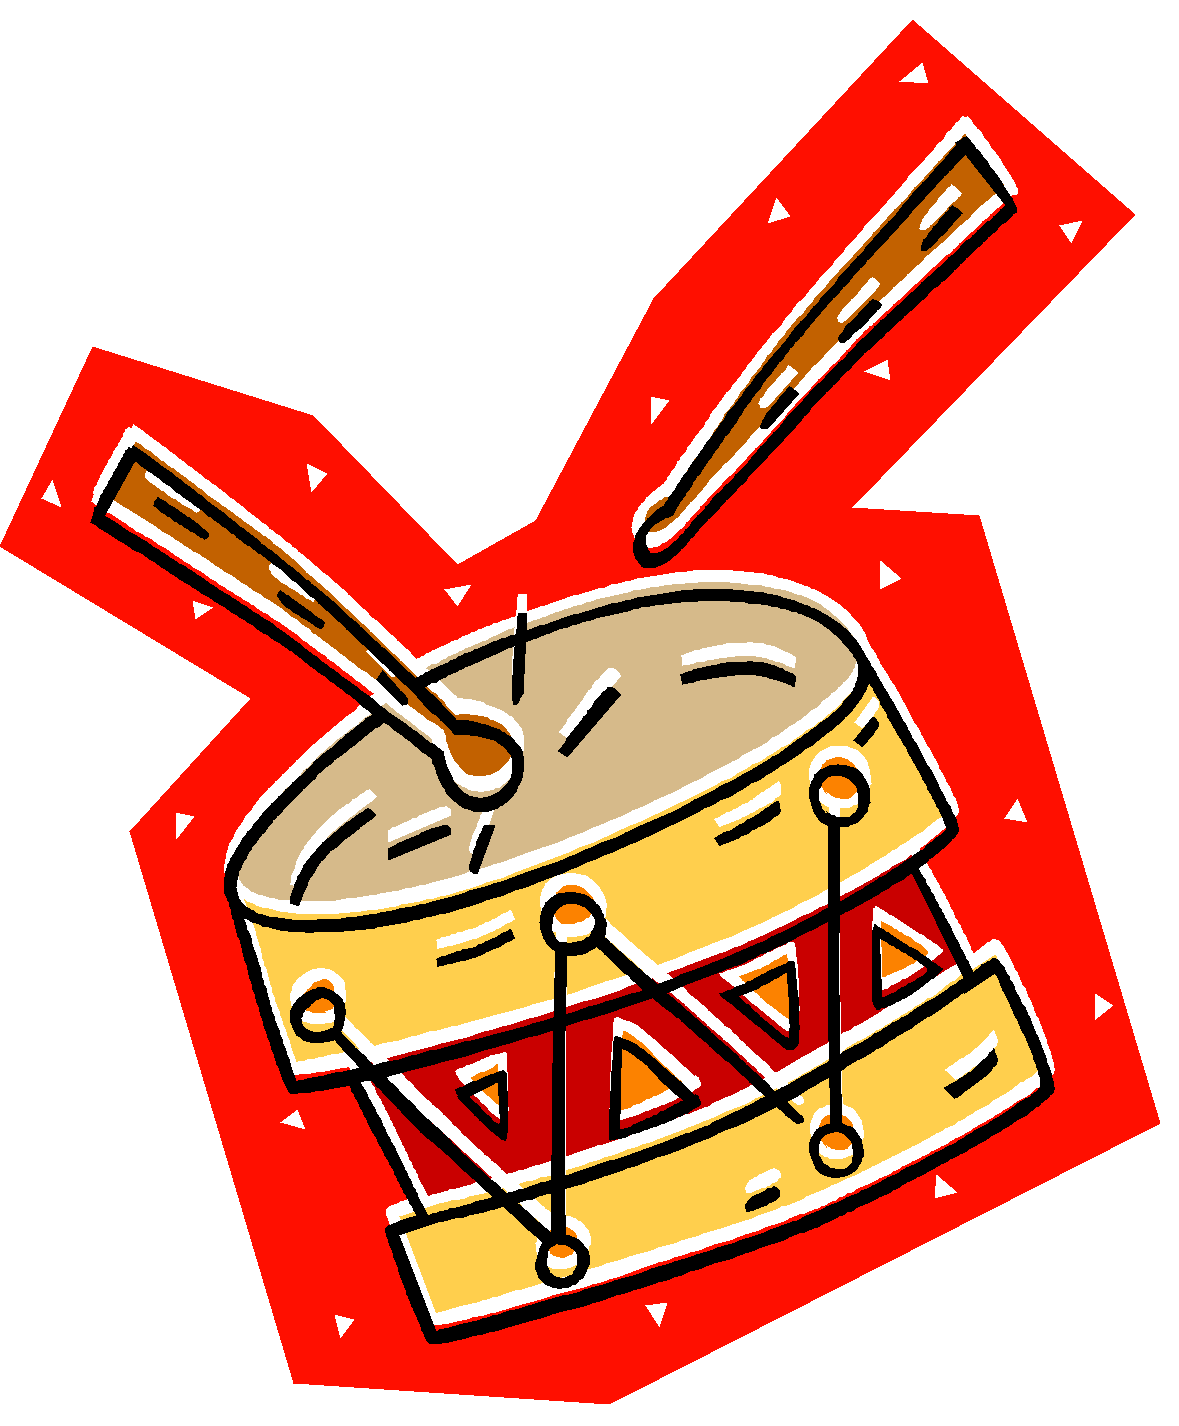 Xylophone clipart vibraphone. Holiday percussion recent blog